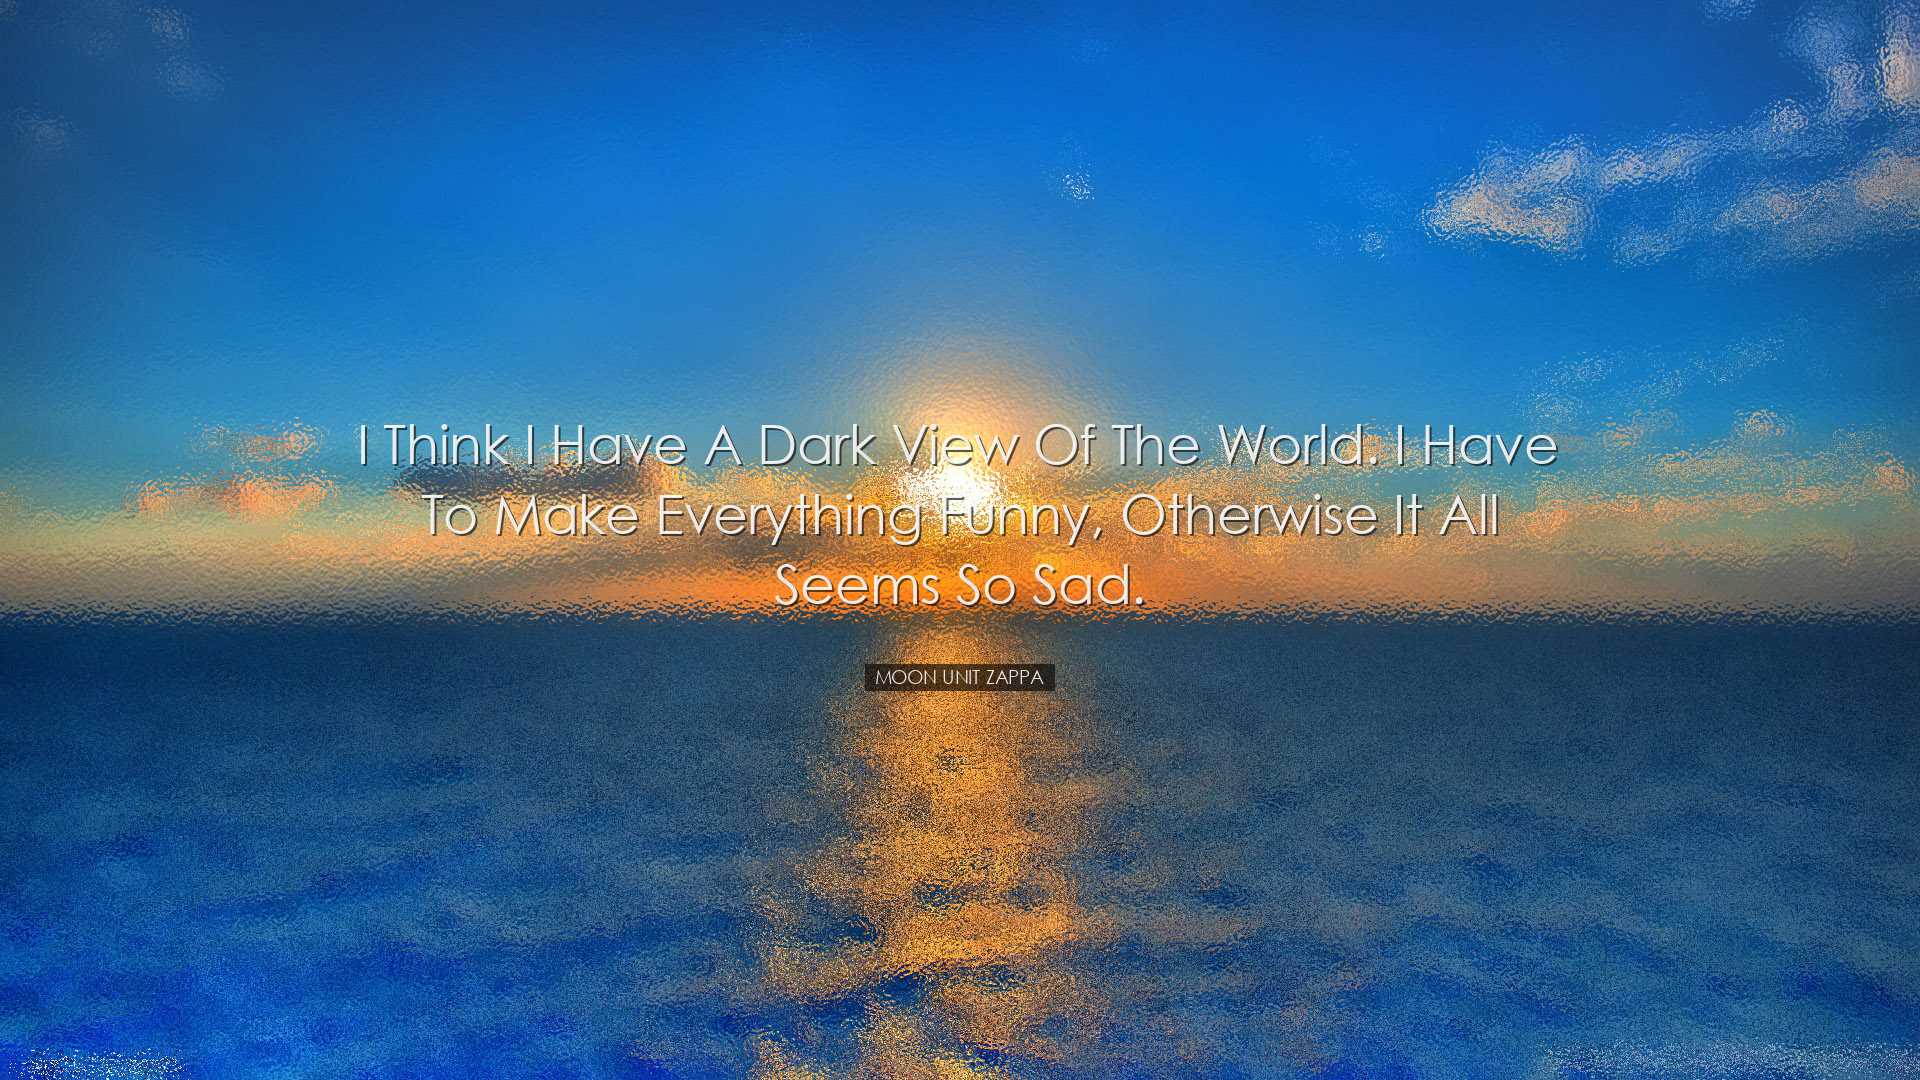 I think I have a dark view of the world. I have to make everything